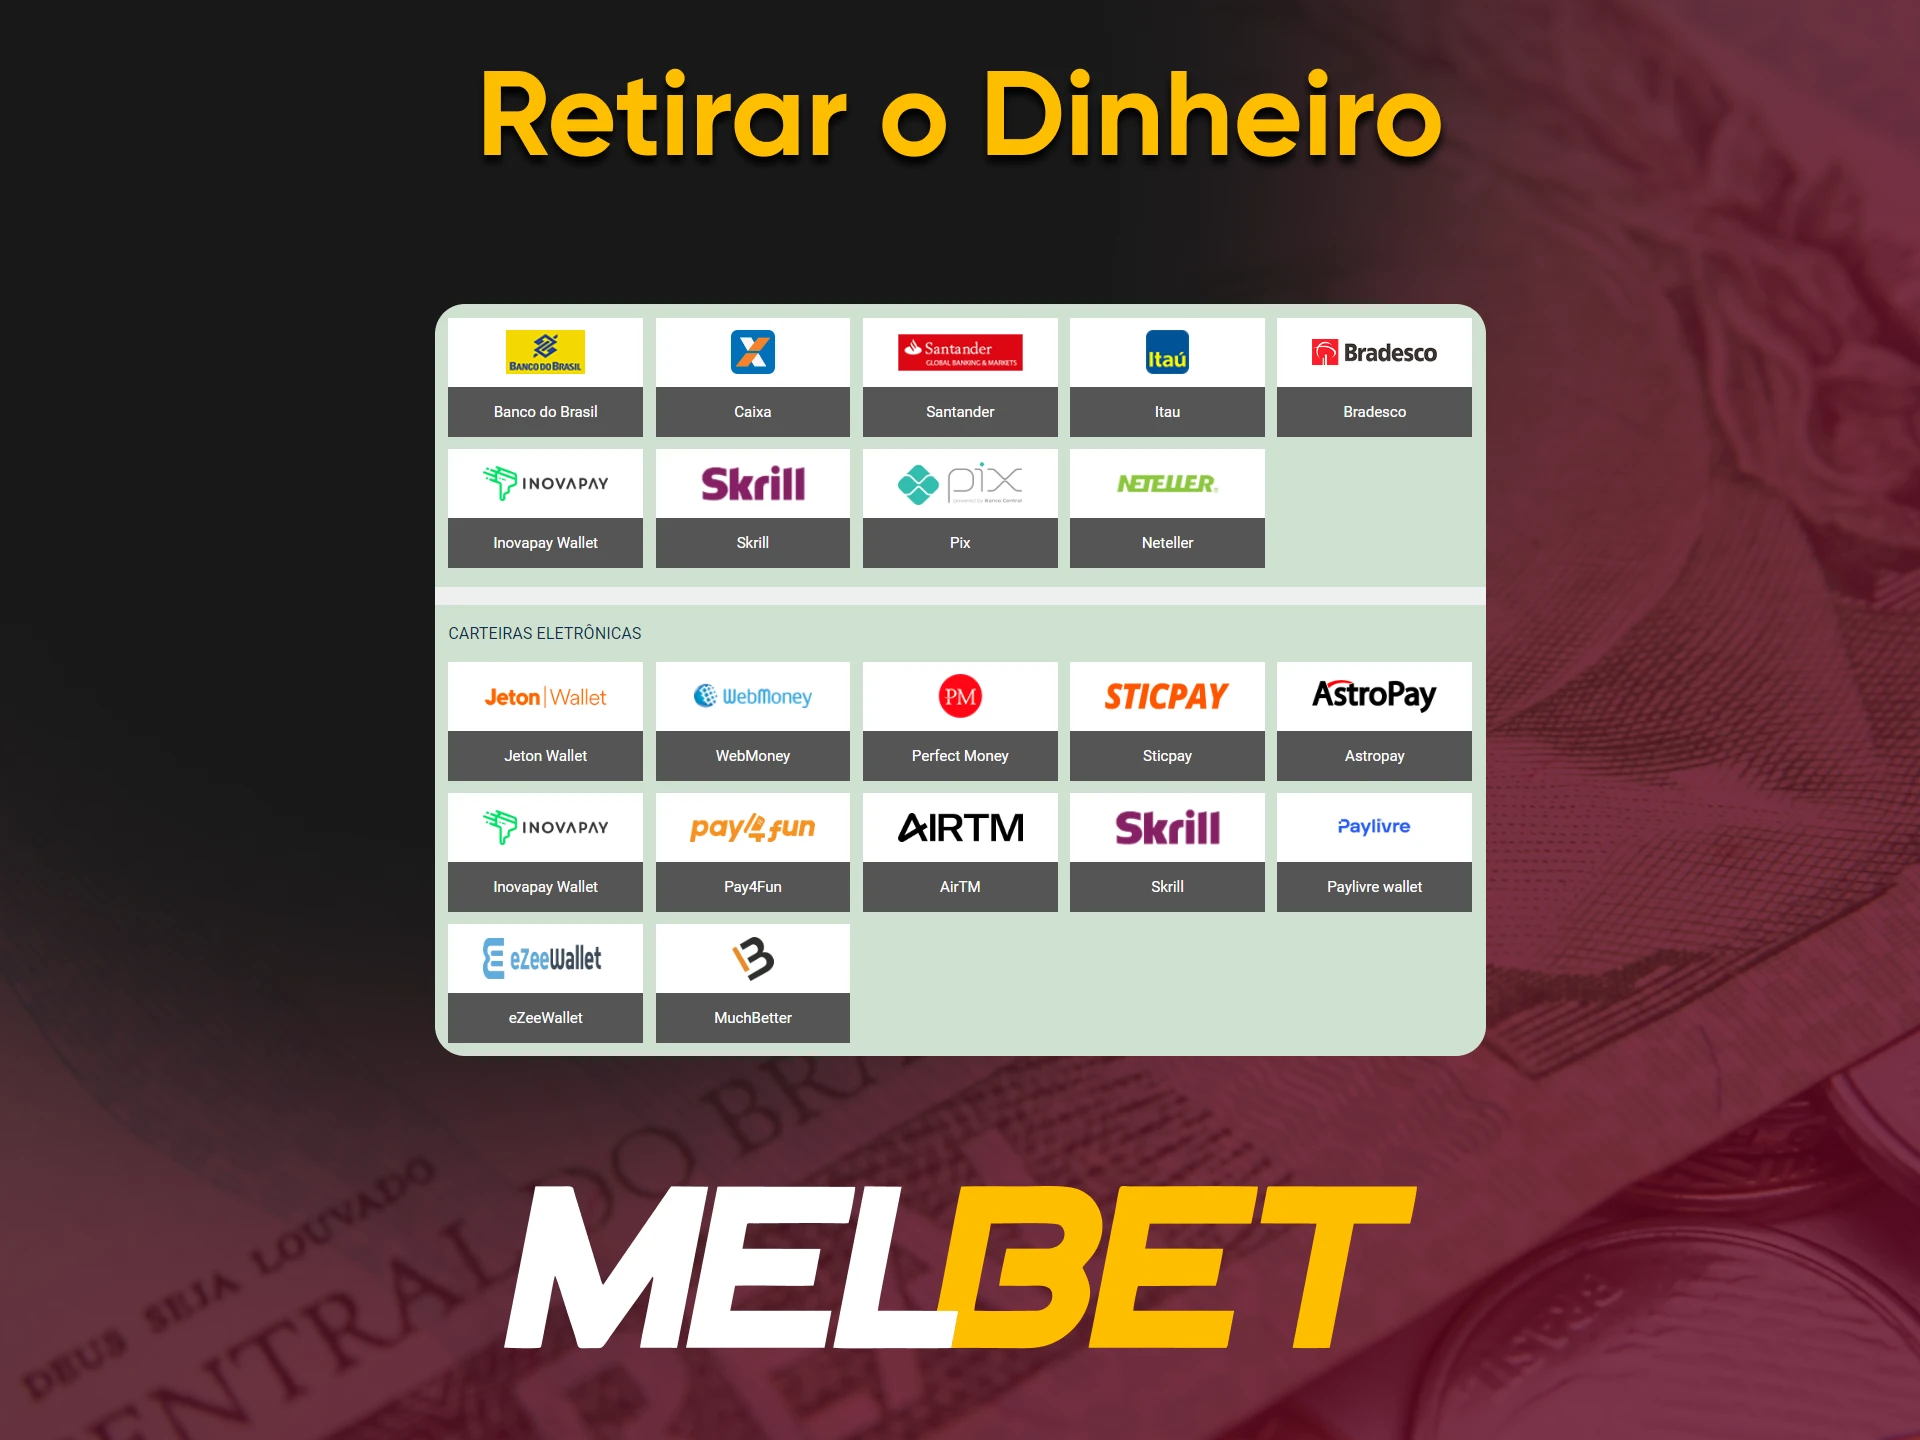 It is possible to withdraw funds from Melbet.